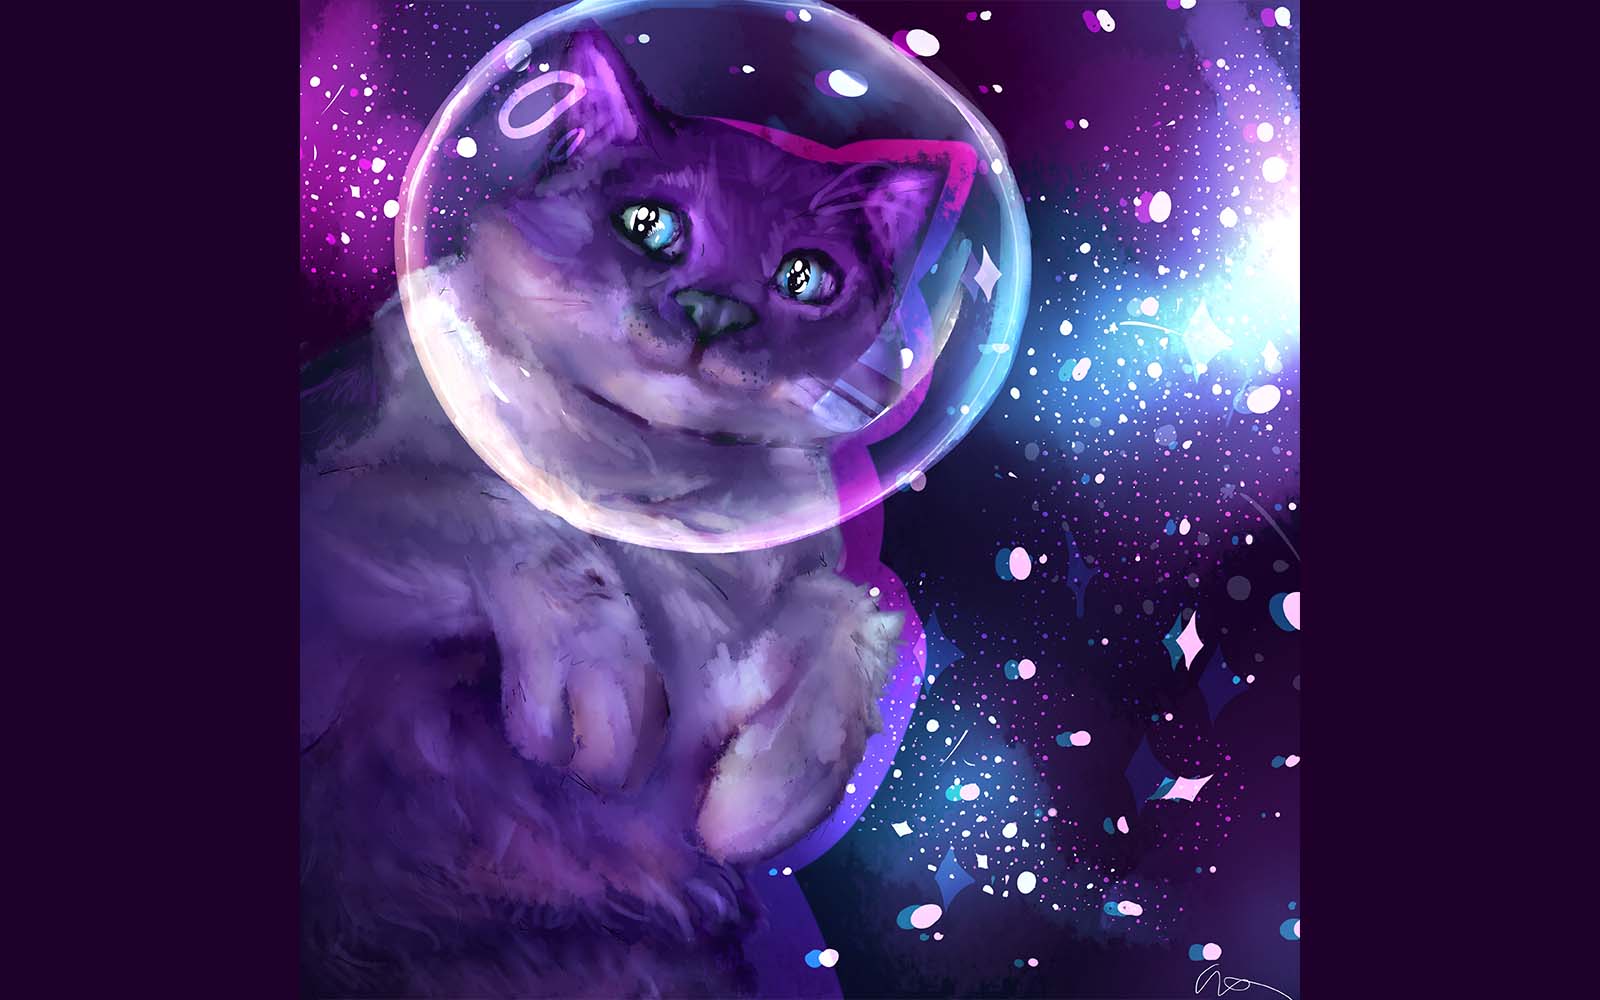 Digital illustration of a cat in space wearing a transparent bubble helmet